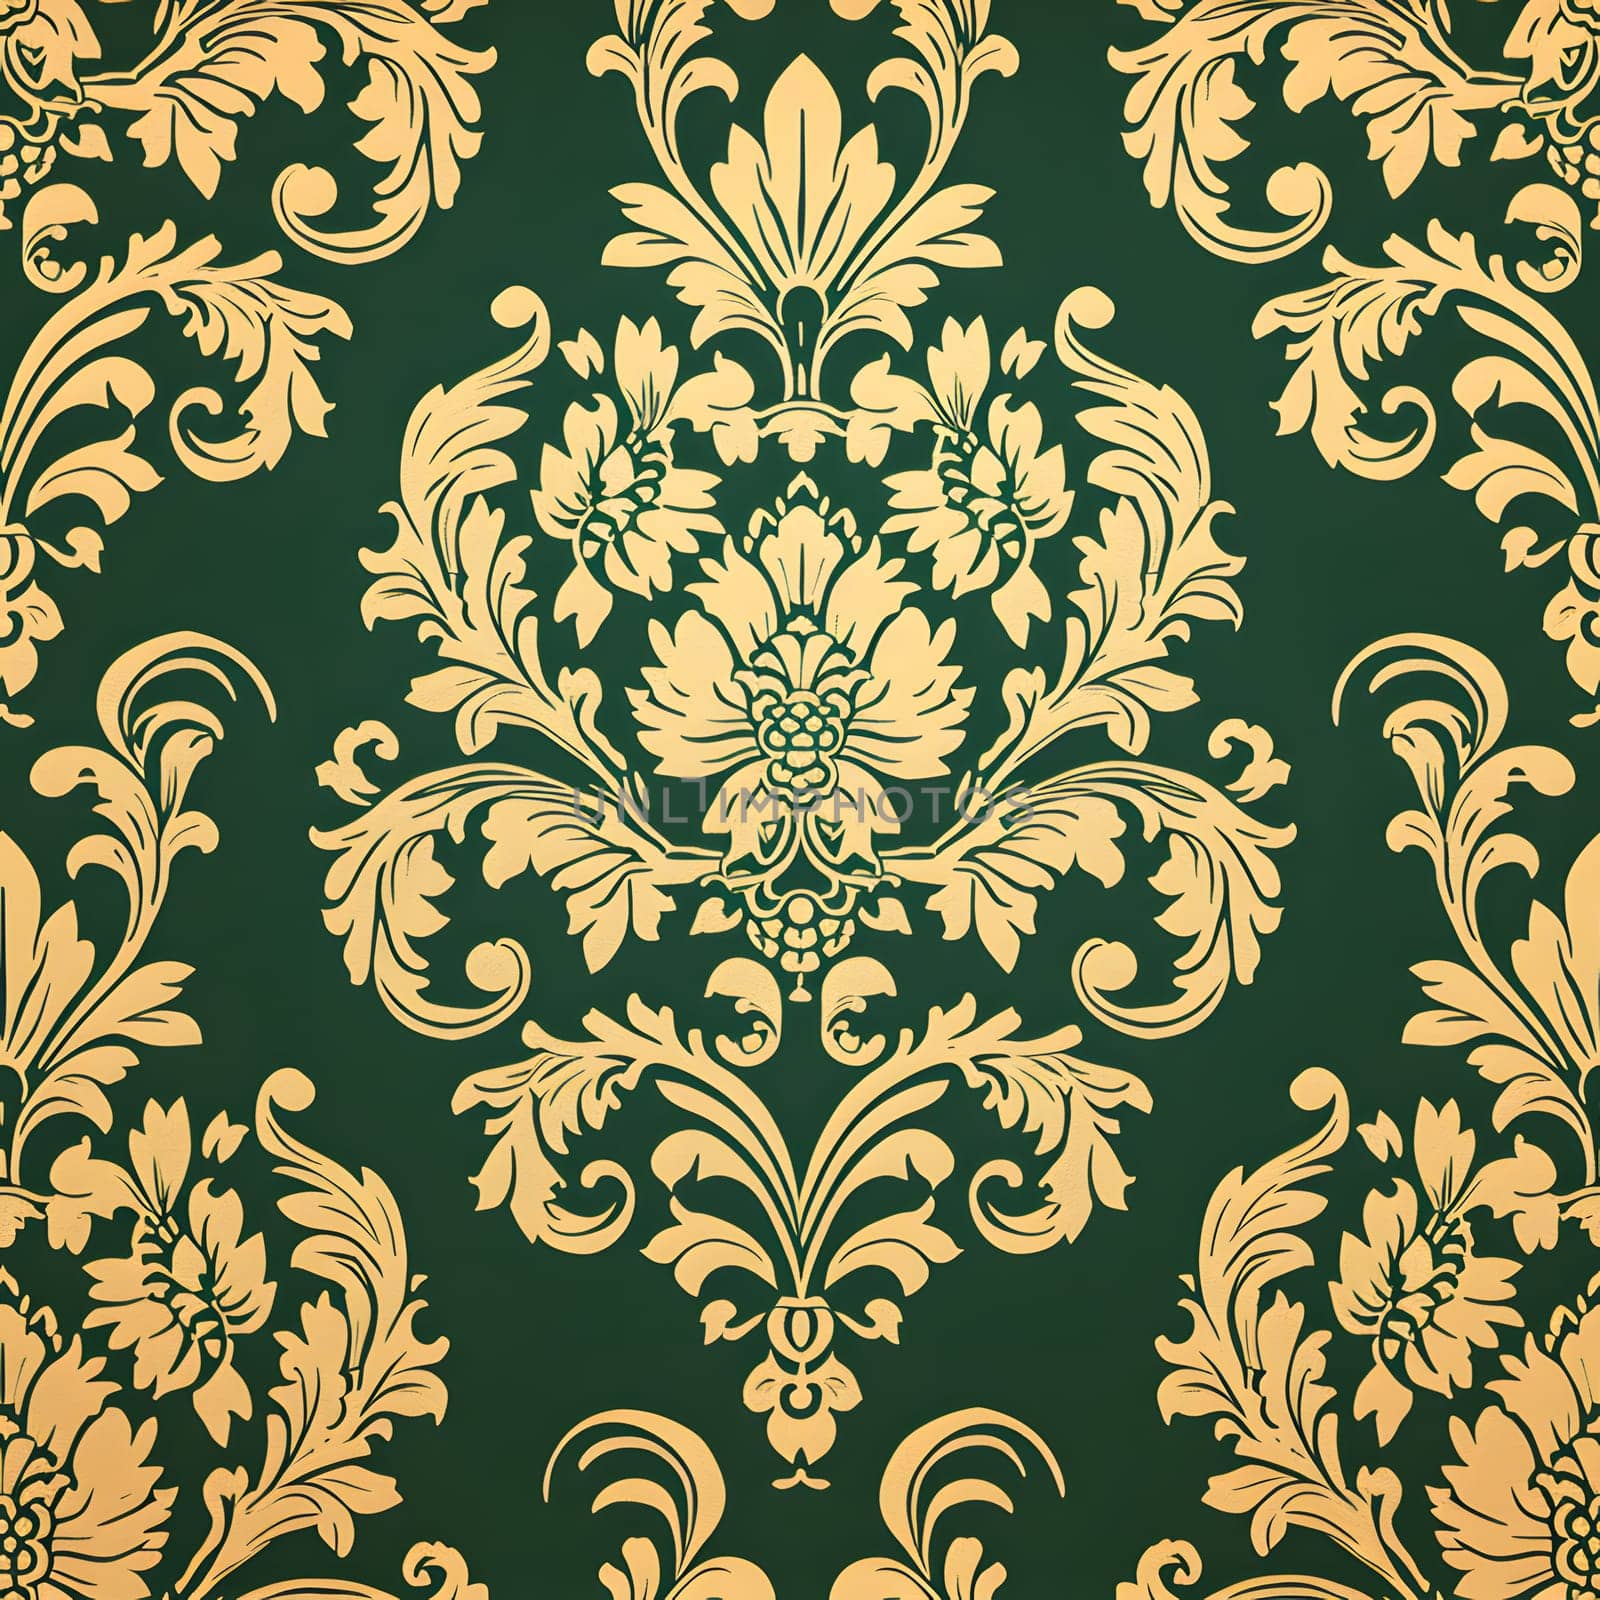 seamless texture of green and gold damask pattern by z1b